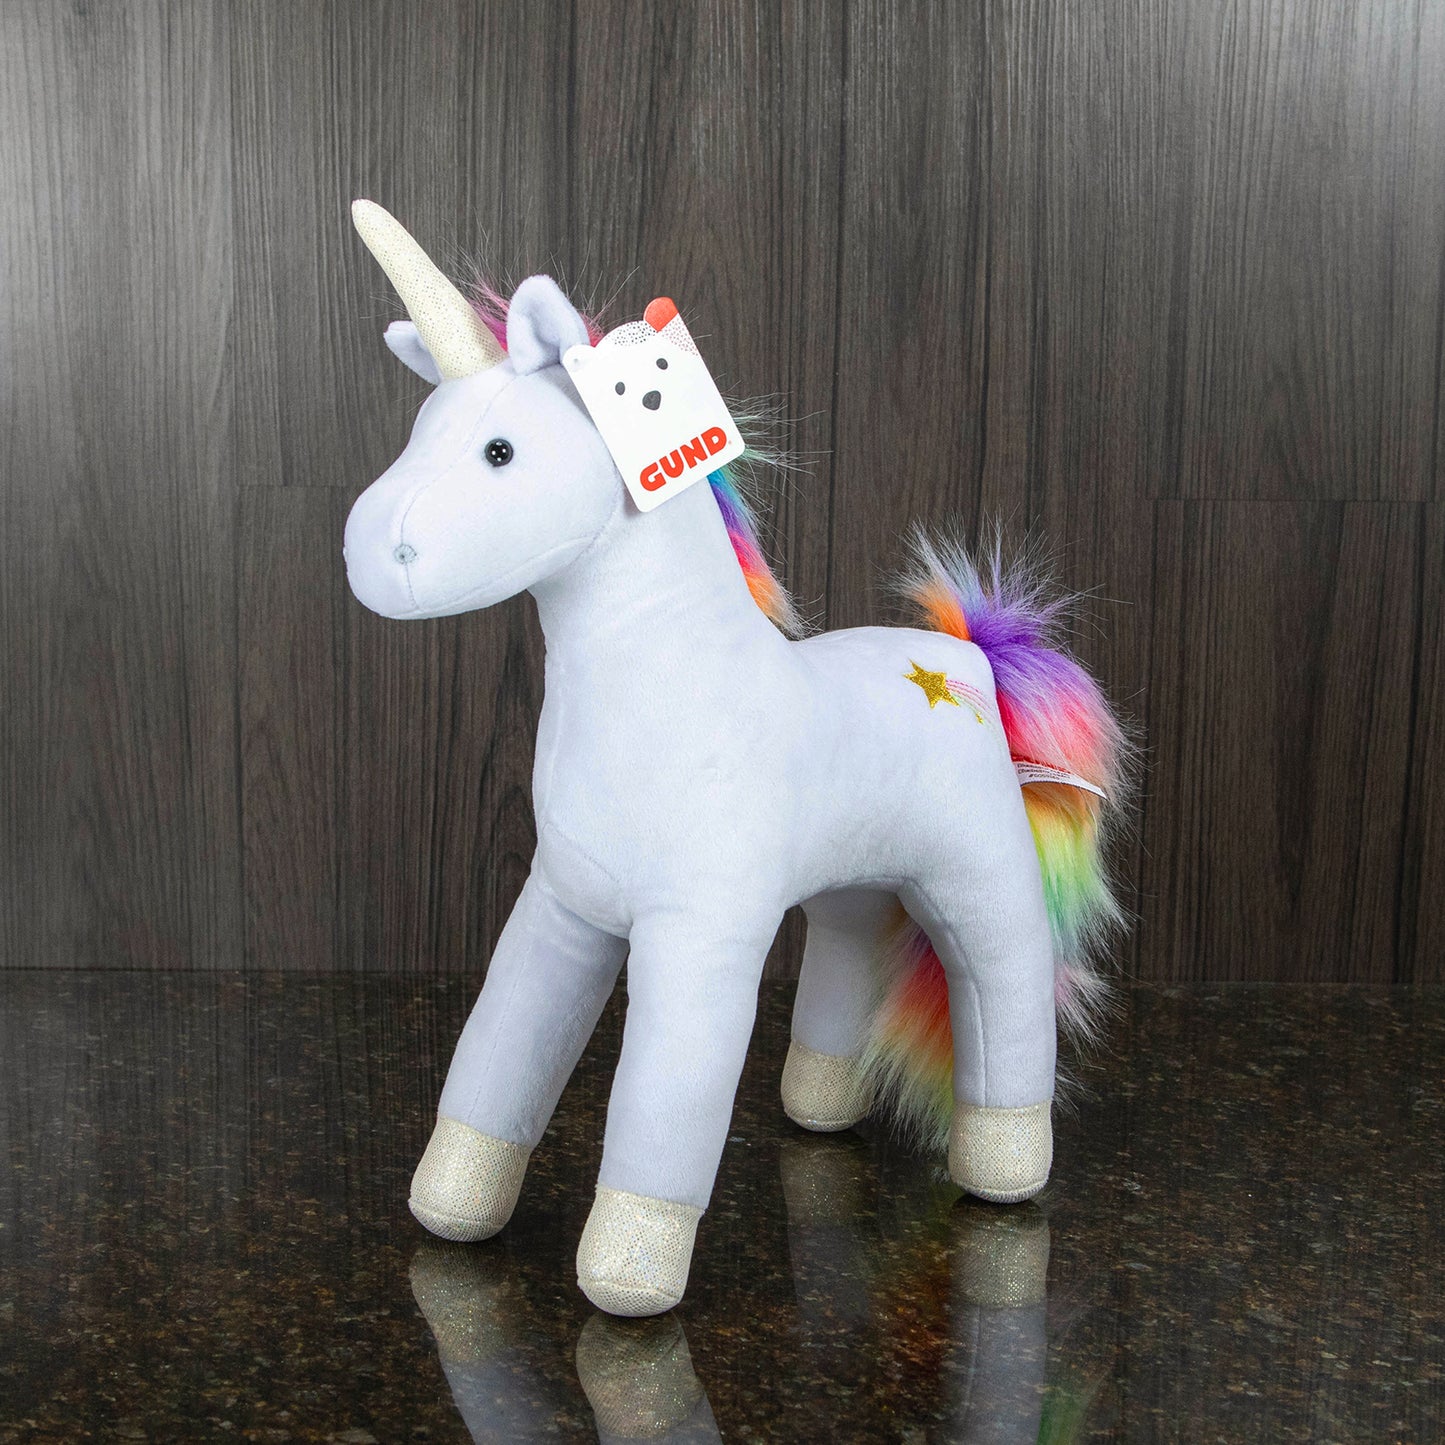 a stuffed unicorn toy with a light blue body and a rainbow mane and tail